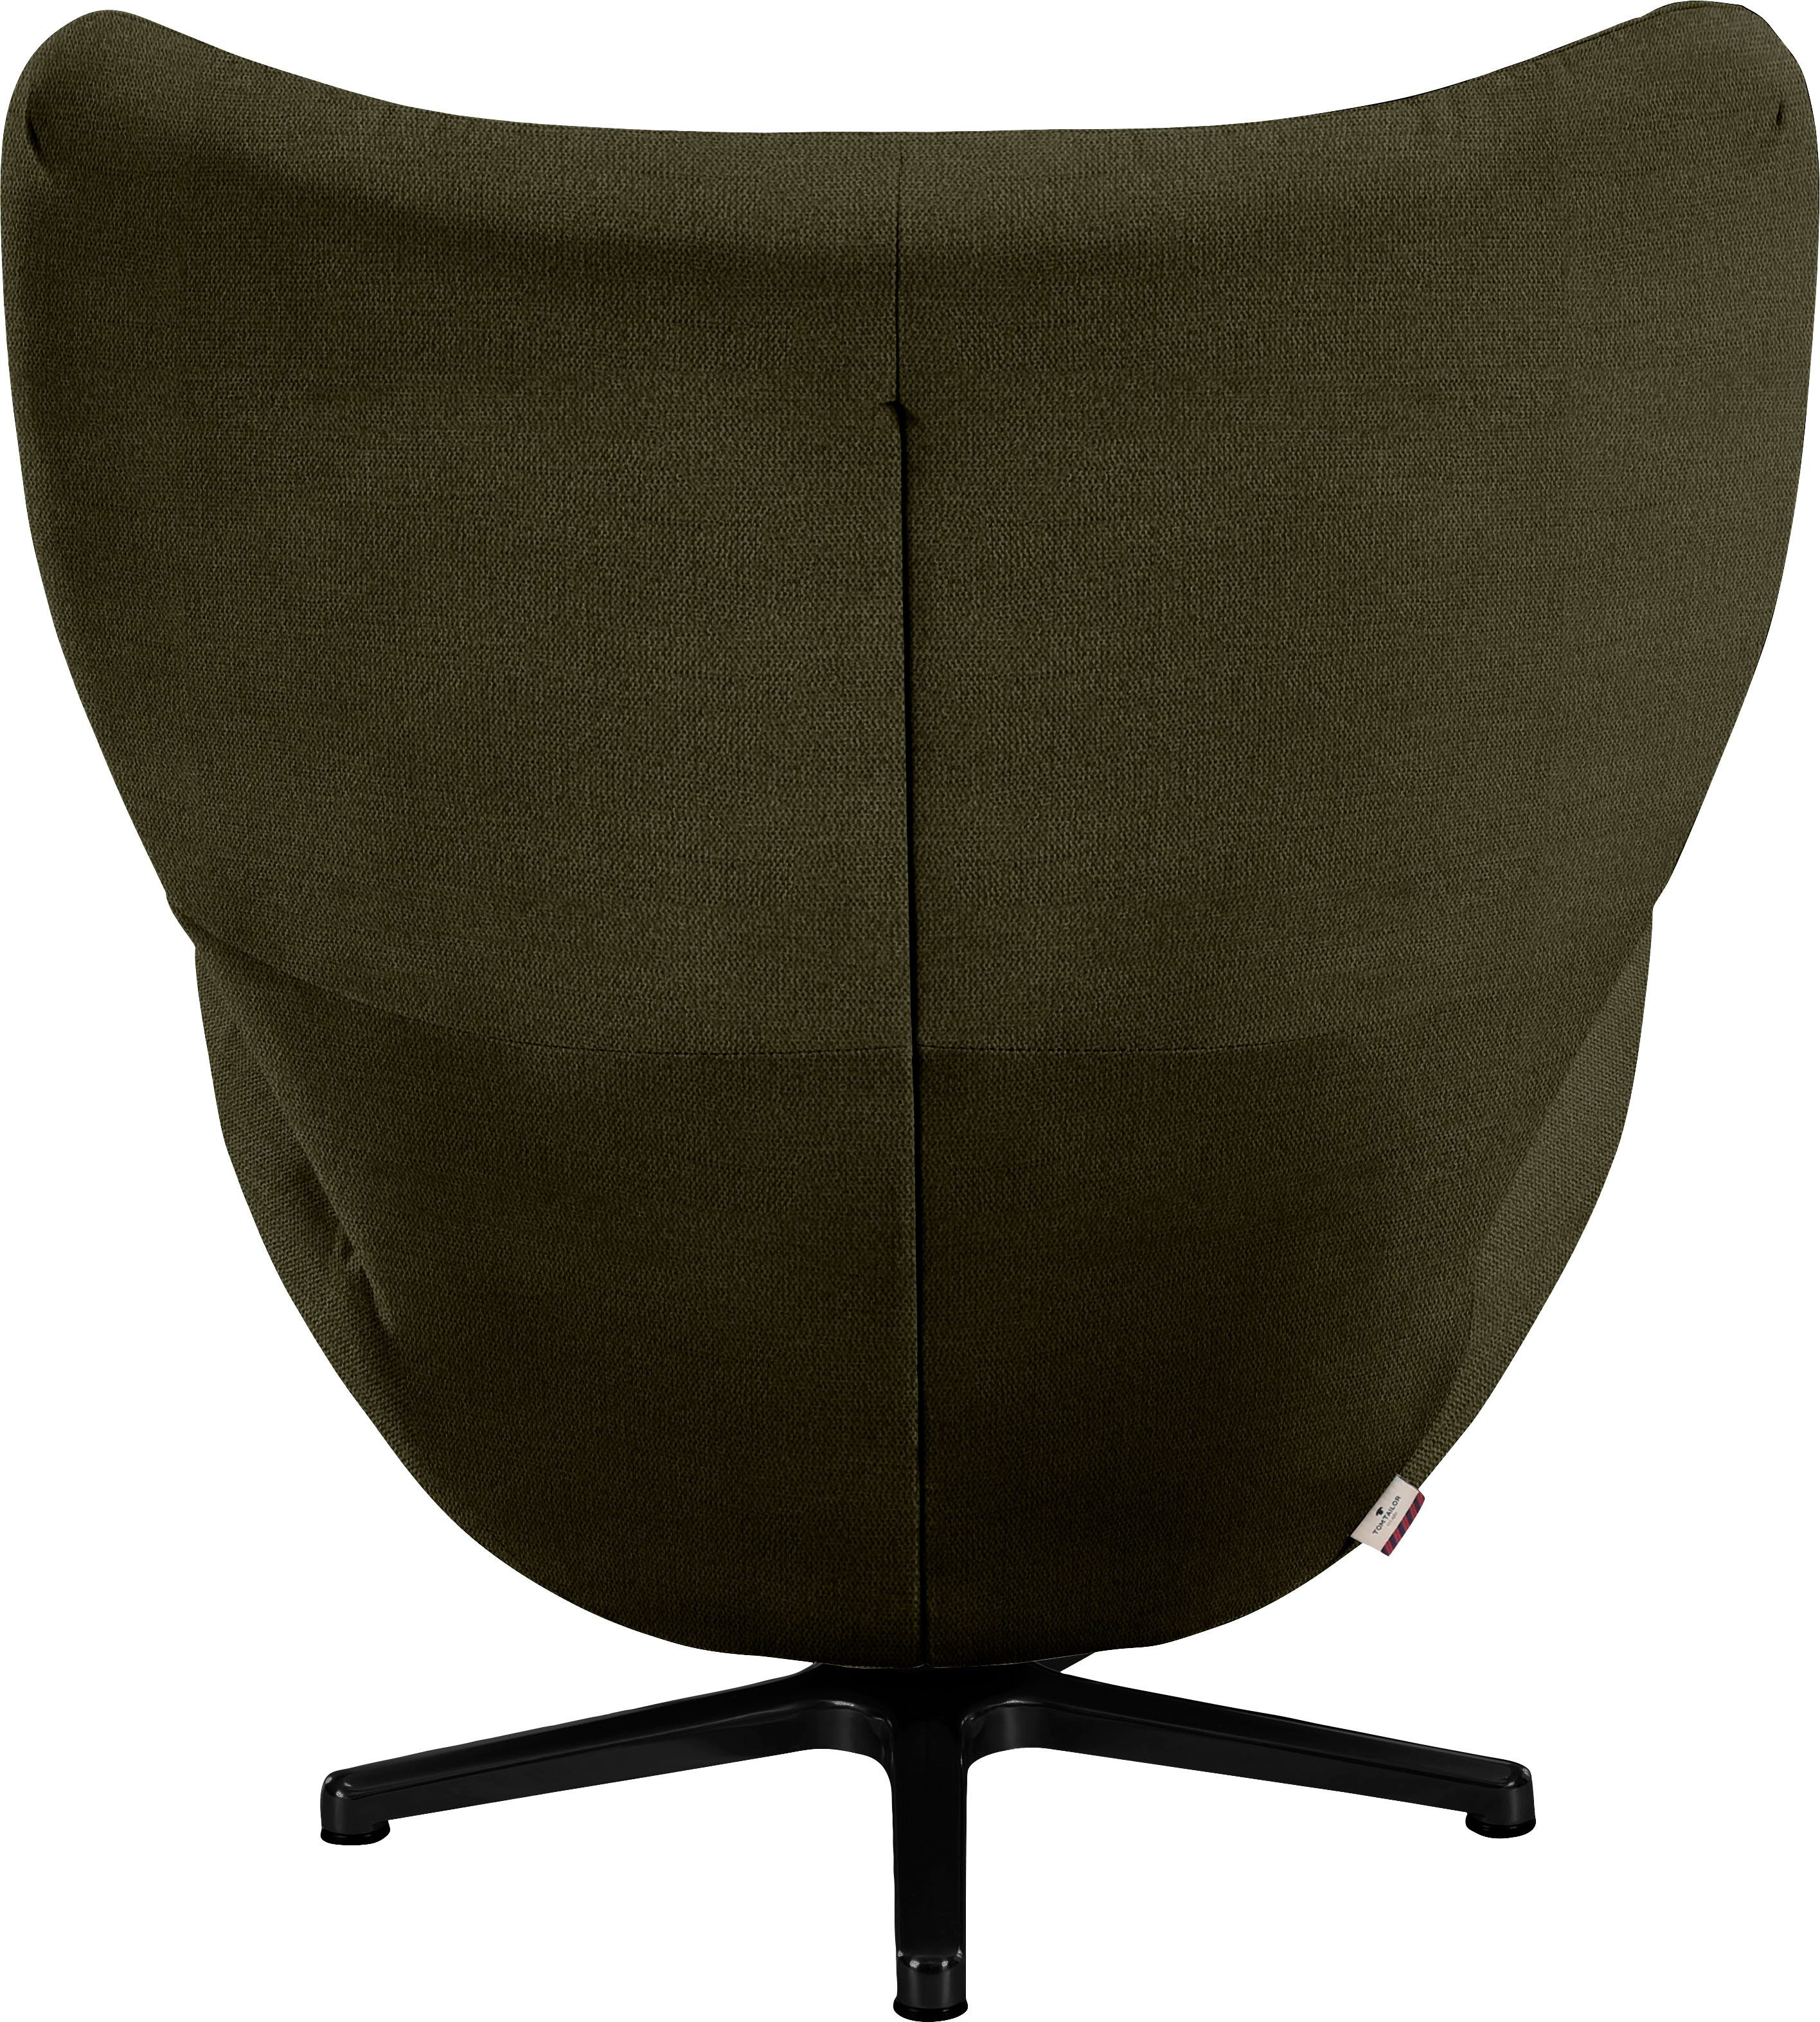 Metall-Drehfuß TOM TOM mit in PURE, Loungesessel Schwarz TAILOR HOME